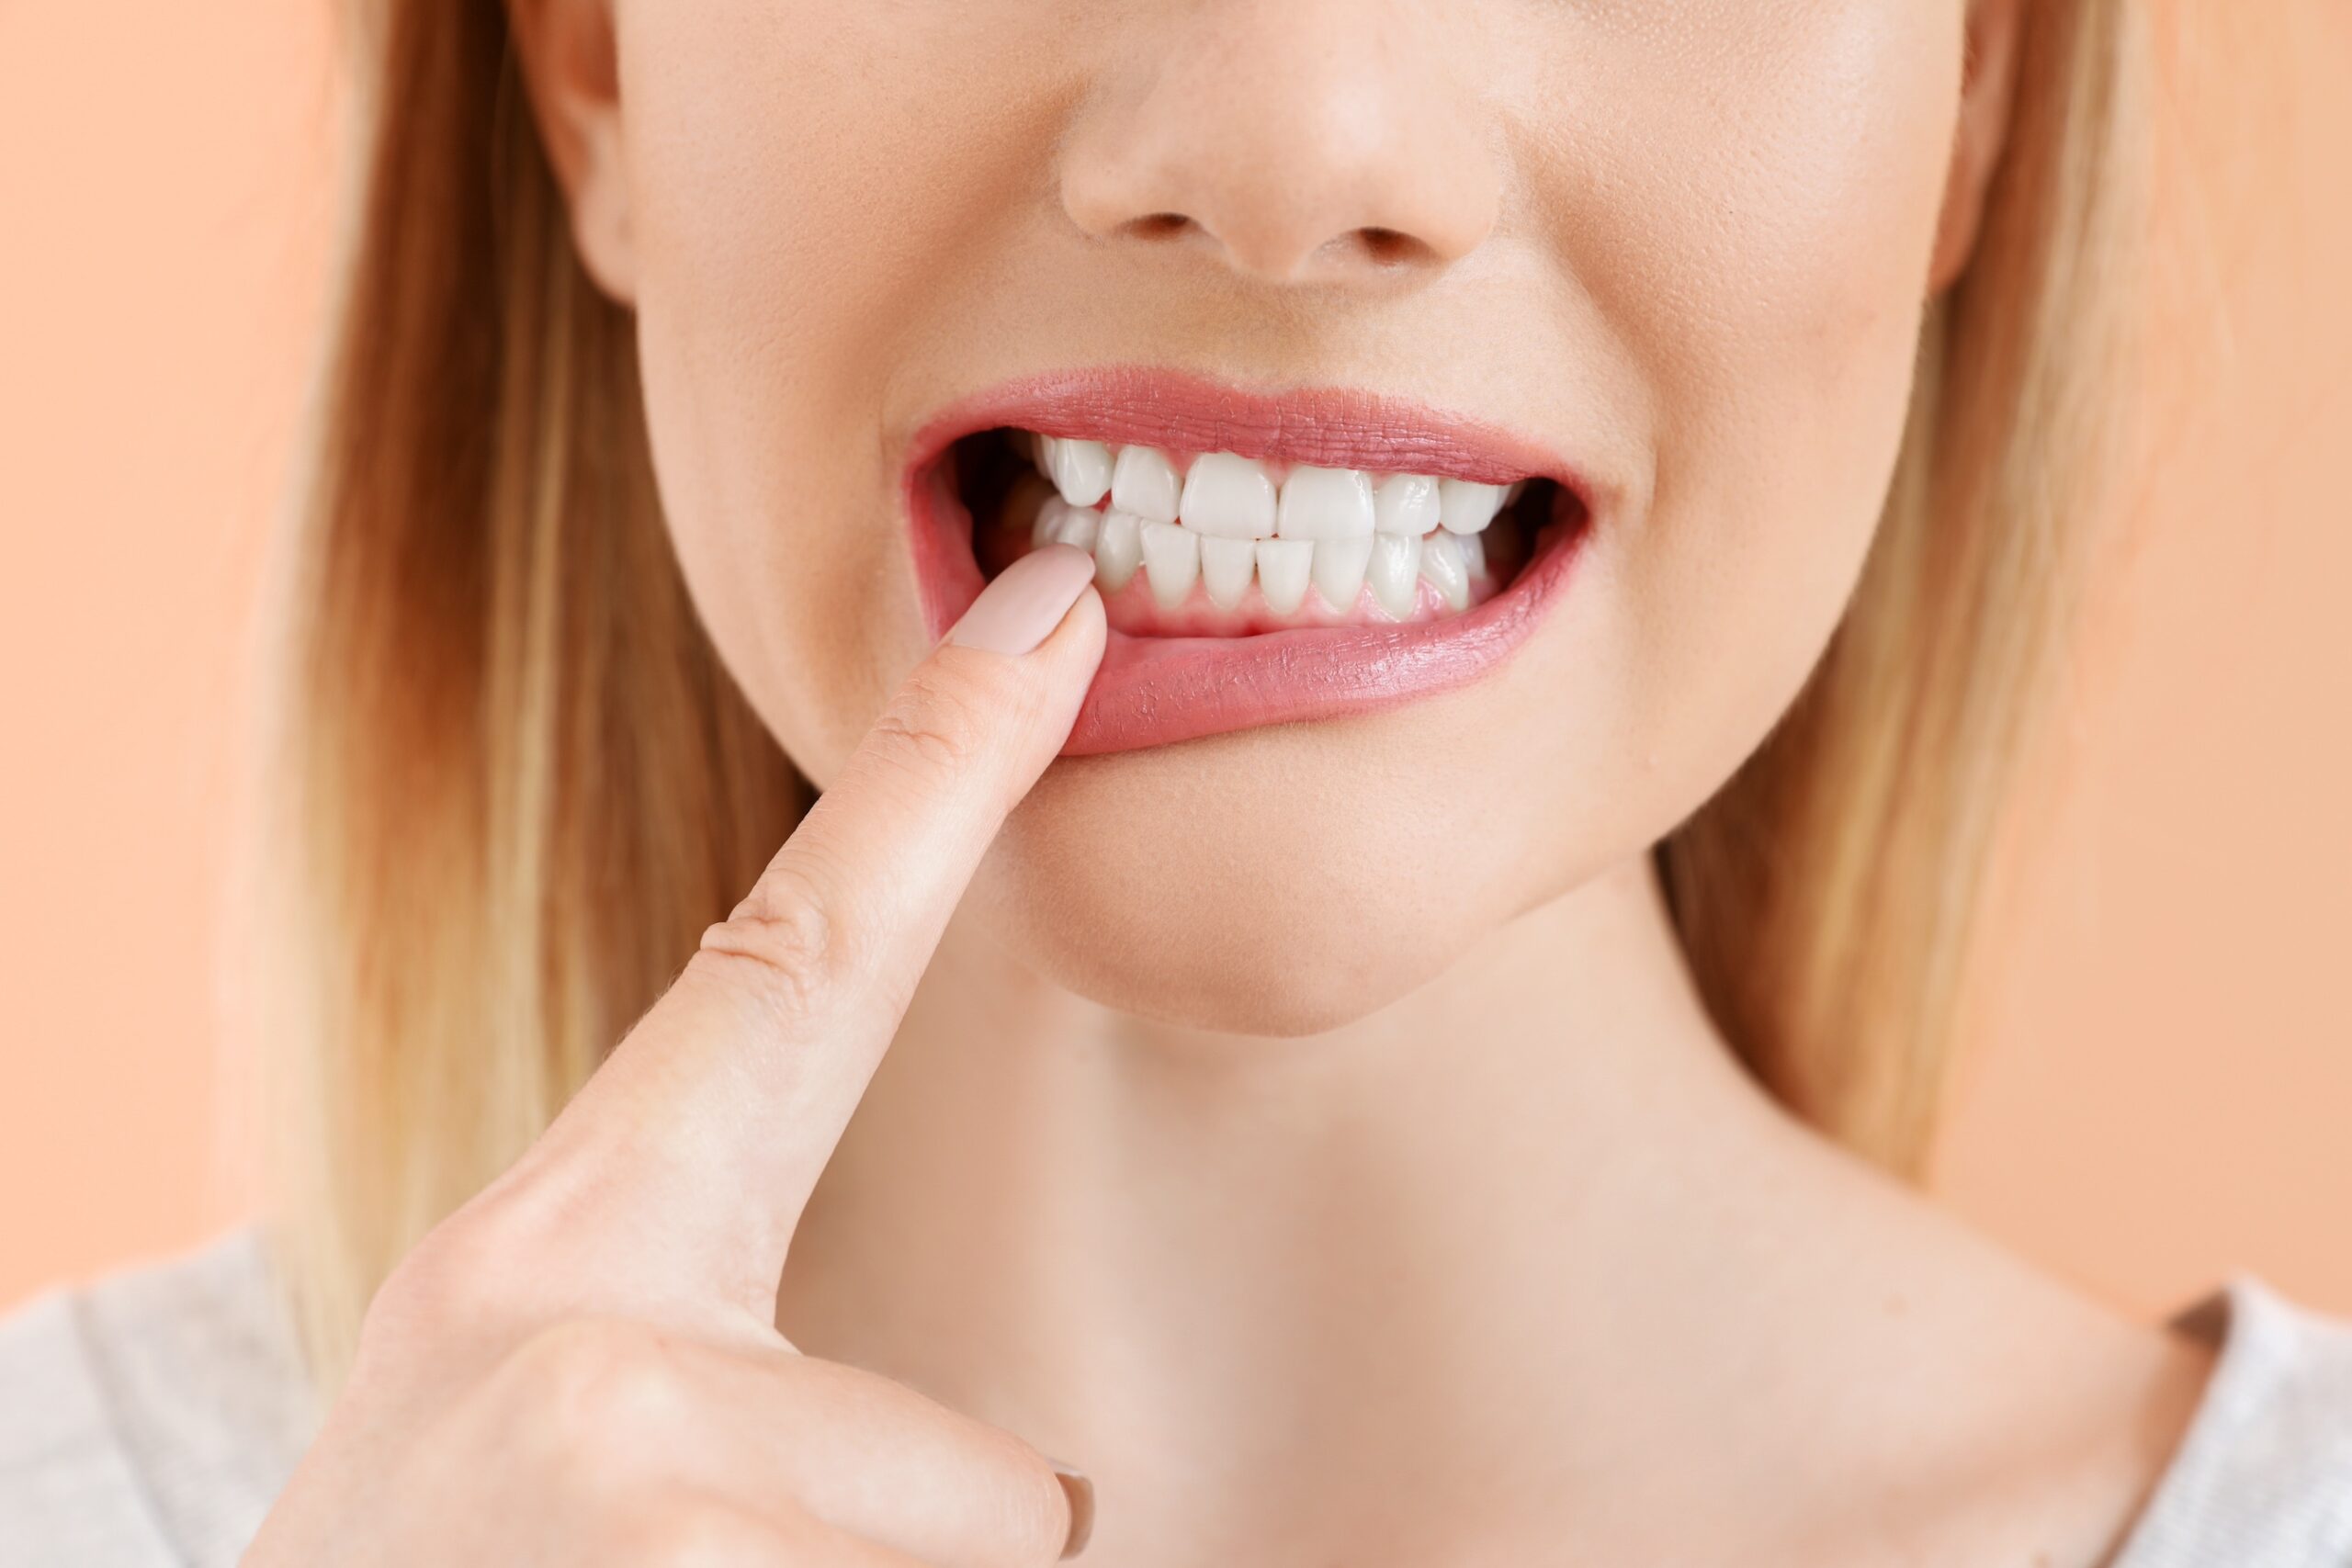 Can Tooth Enamel Erosion Be Reversed